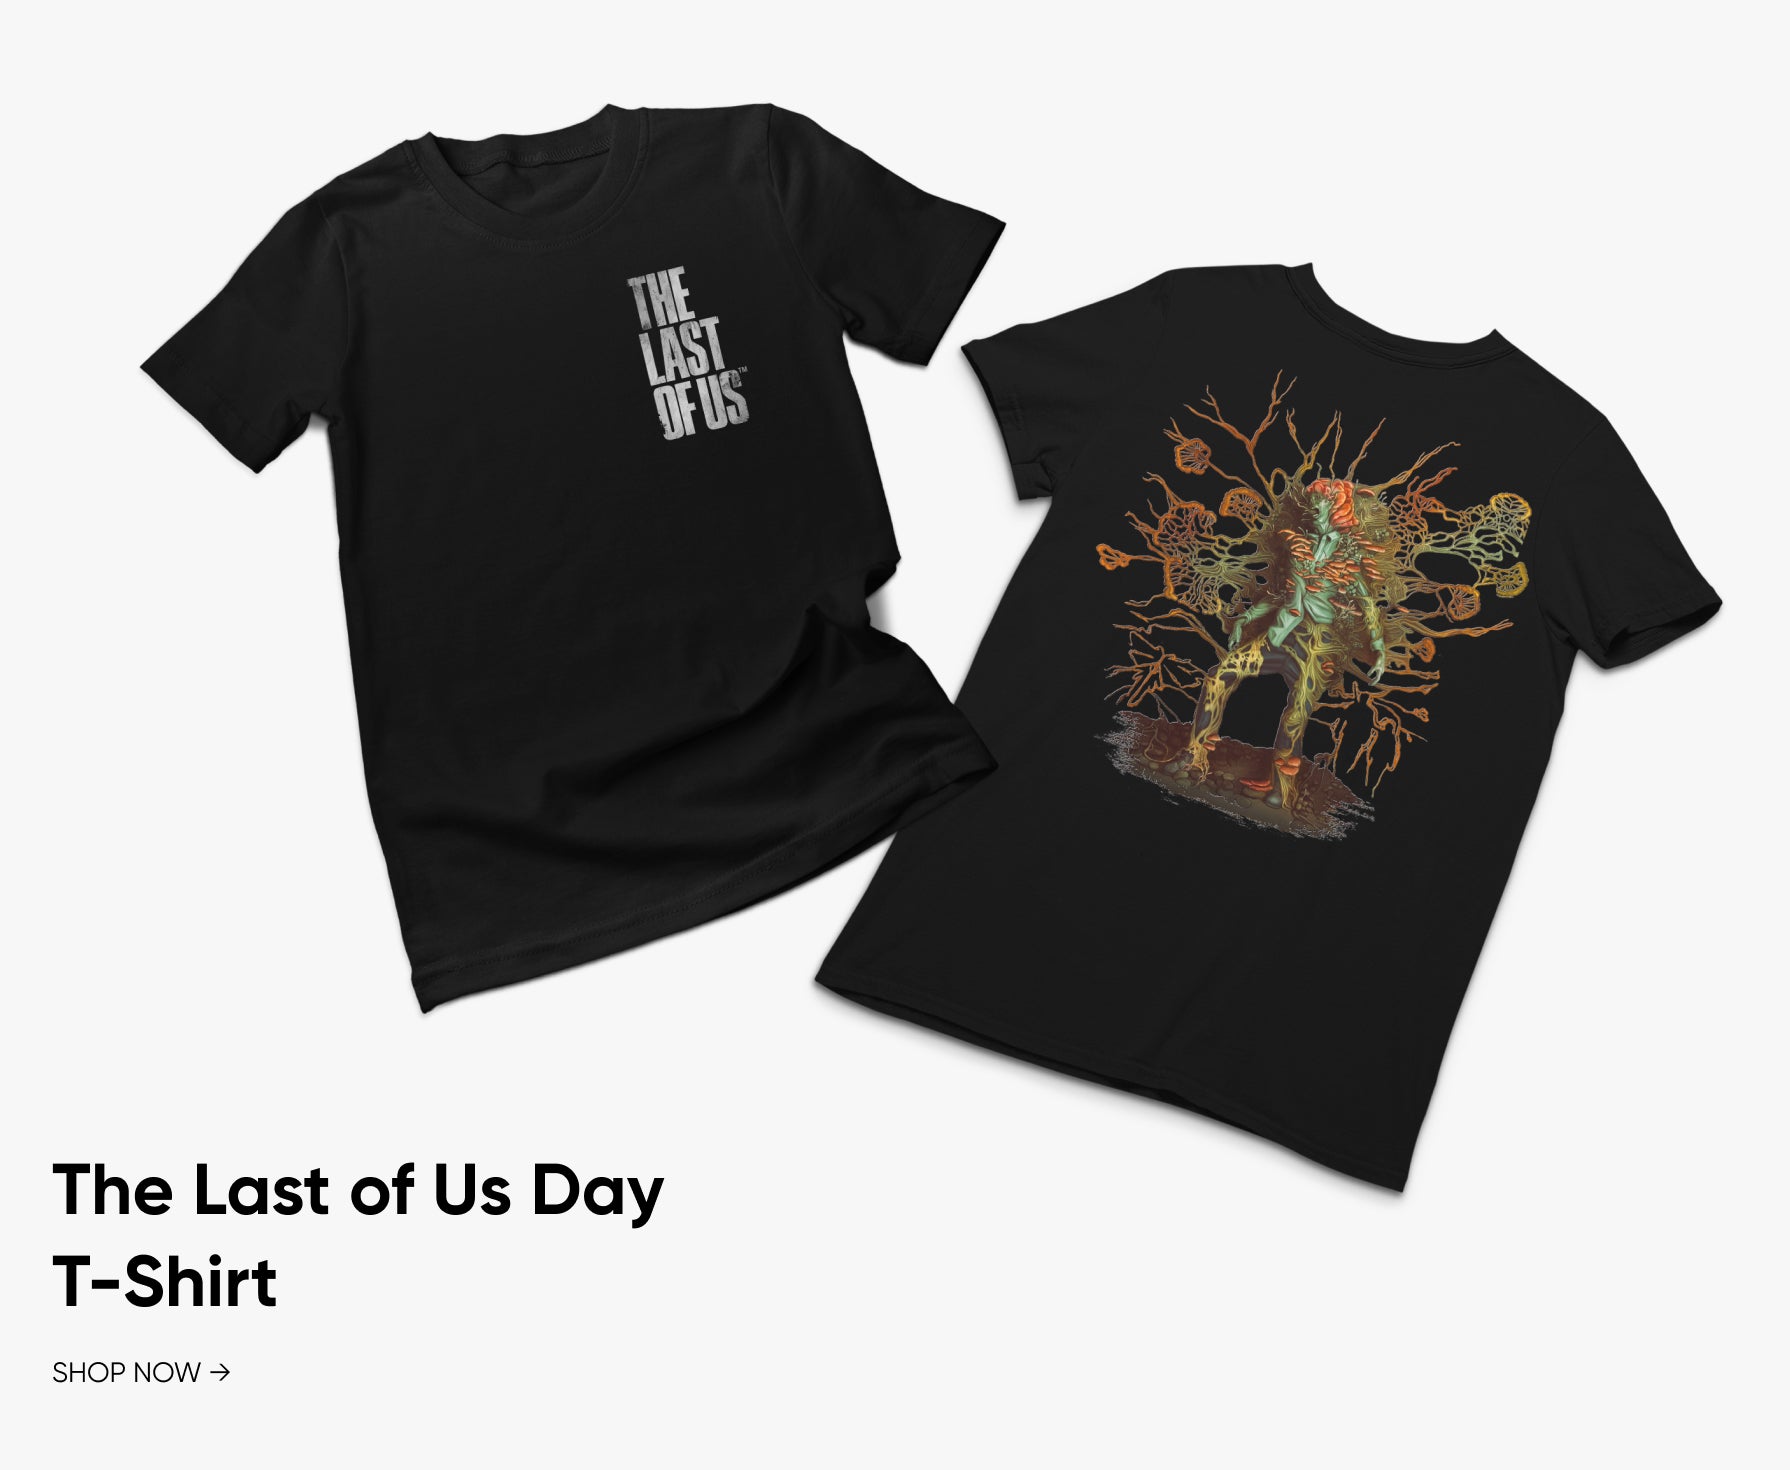 The Last of Us Day T-Shirt